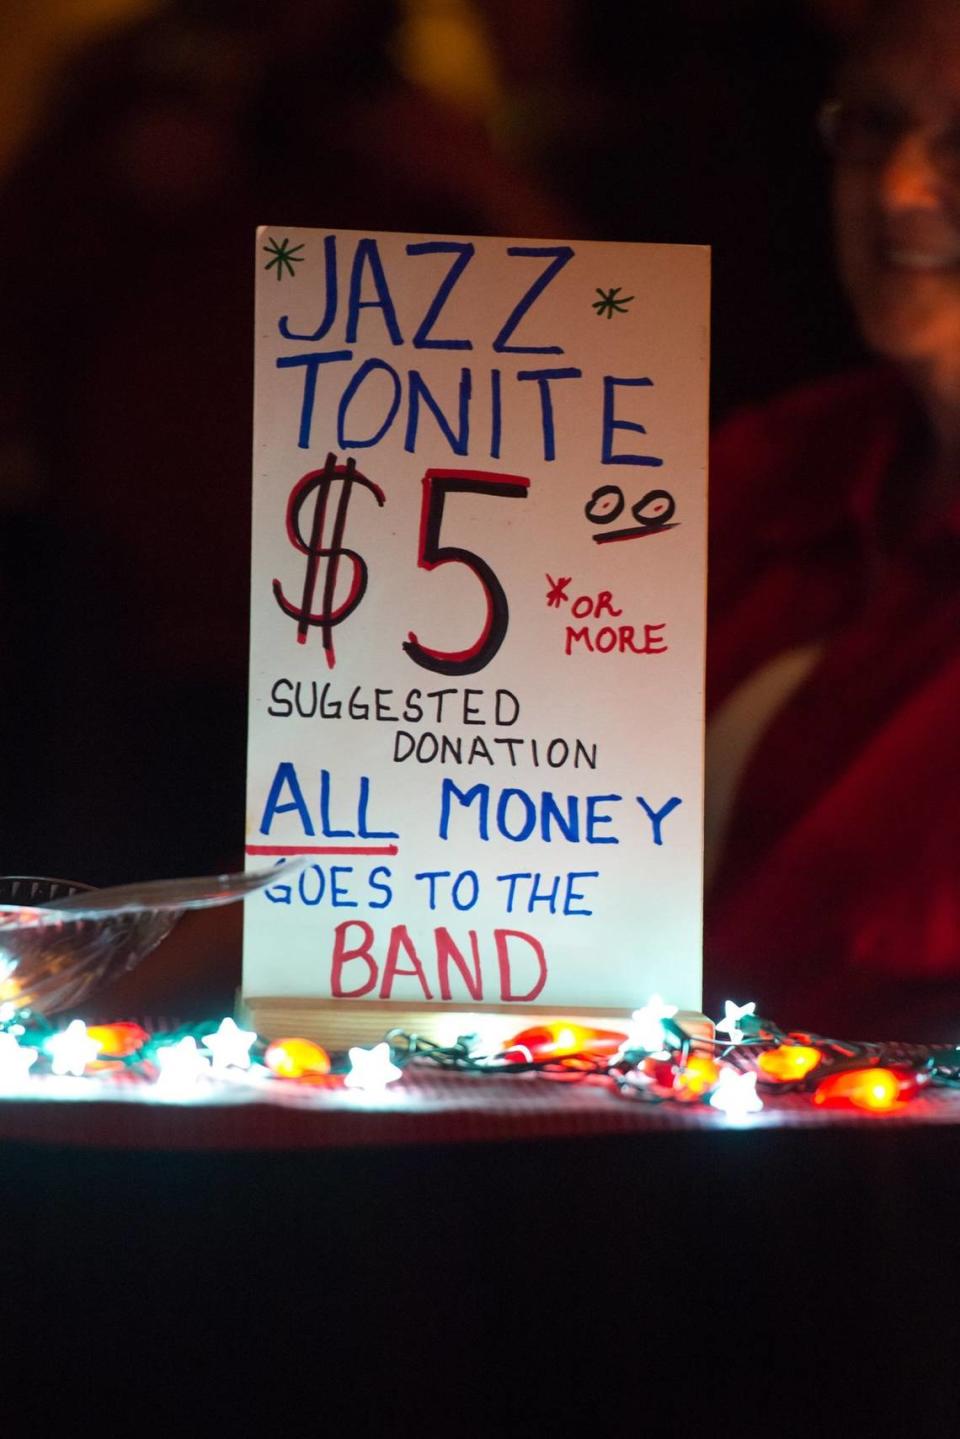 Olympia Jazz Central offered by-donation Monday night jazz concerts for 10 years. Now, the tradition is coming back.